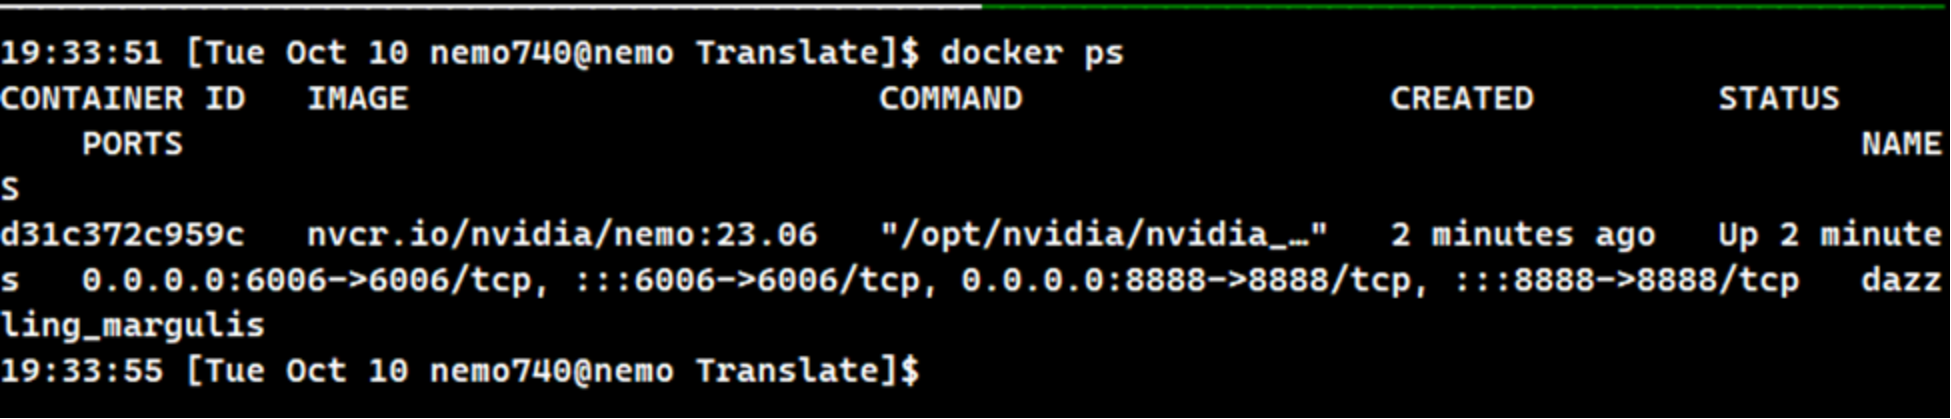 Code and output of the docker ps  command